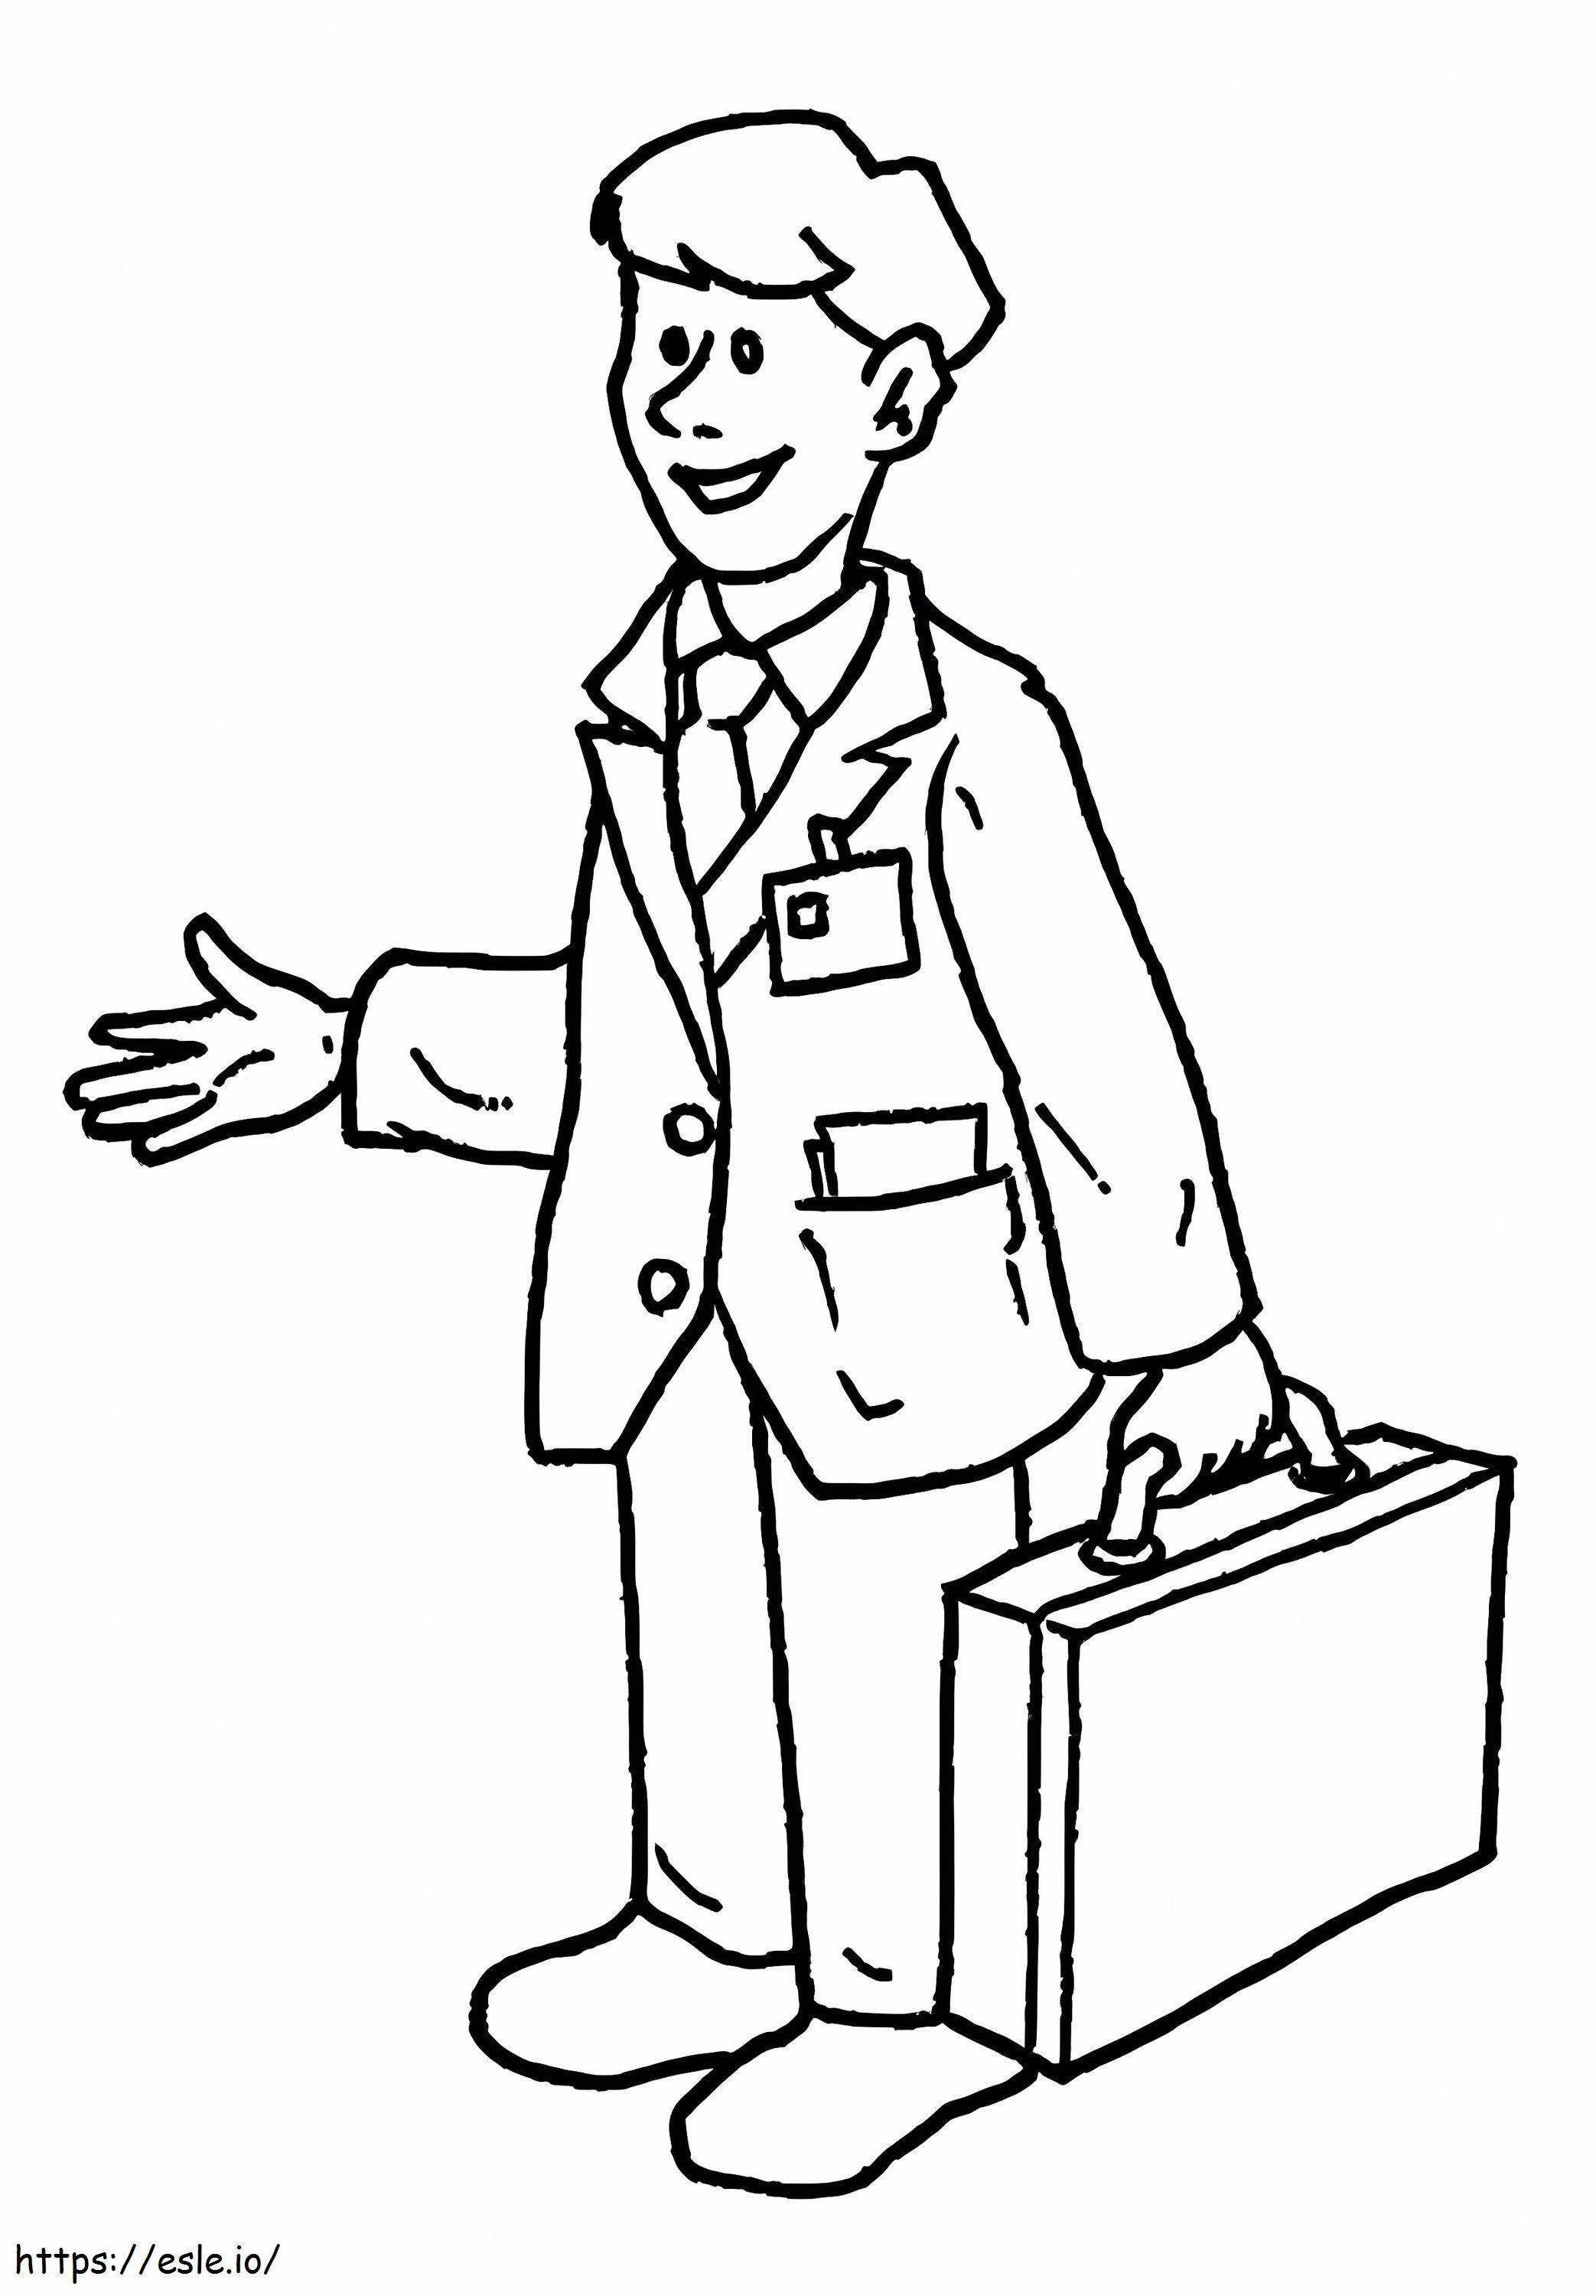 Smiling Business Man coloring page